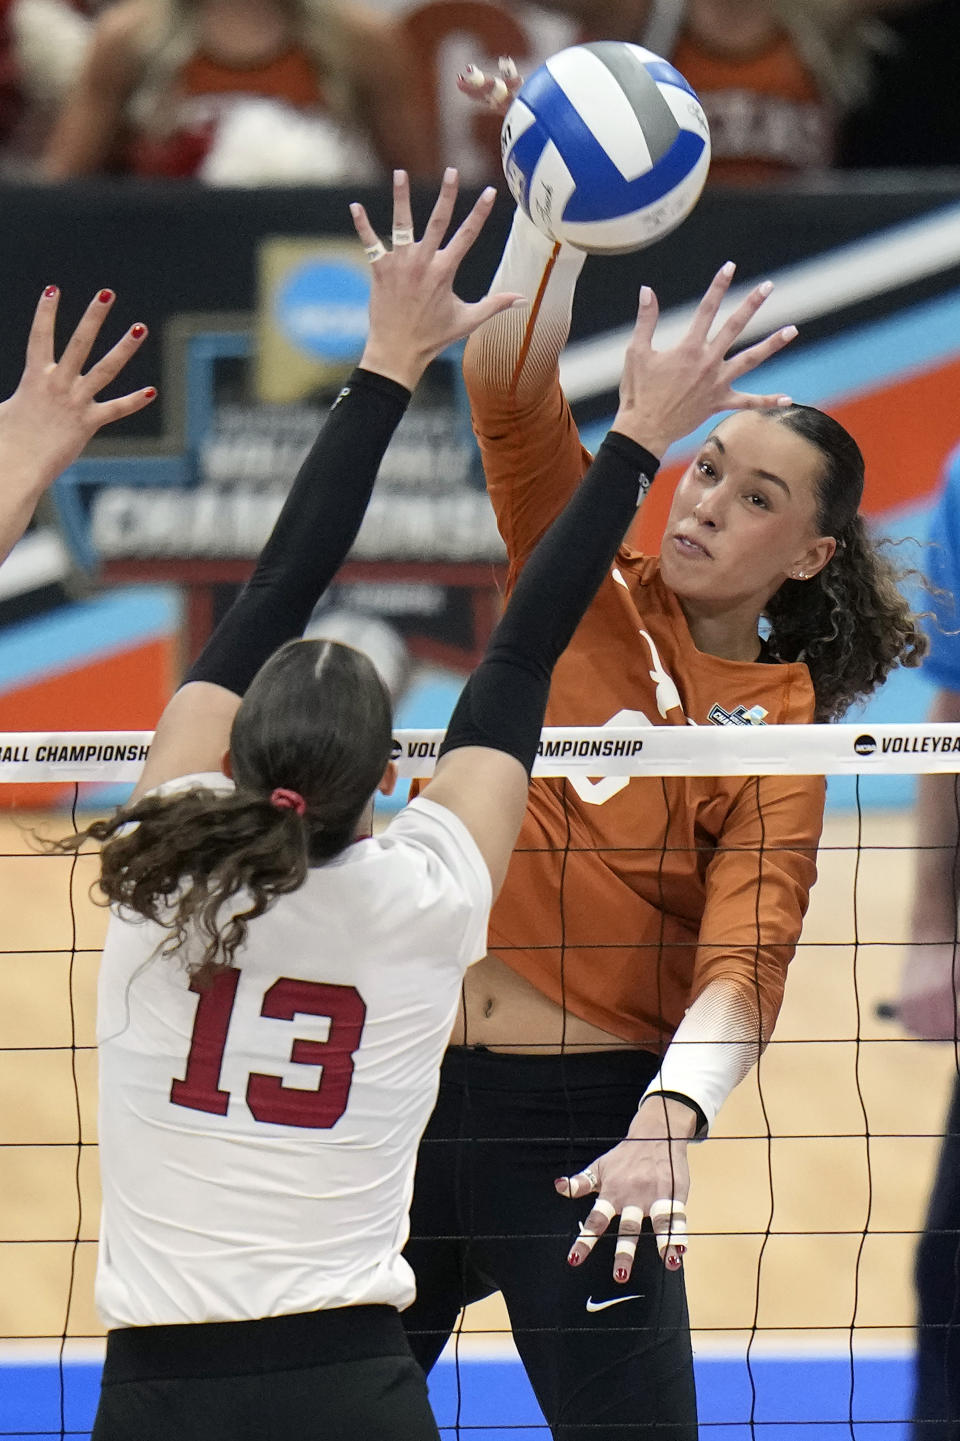 Texas's Madisen Skinner (6) spikes the ball past Nebraska's Merritt Beason (13) during the championship match in the NCAA Division I women's college volleyball tournament Sunday, Dec. 17, 2023, in Tampa, Fla. (AP Photo/Chris O'Meara)